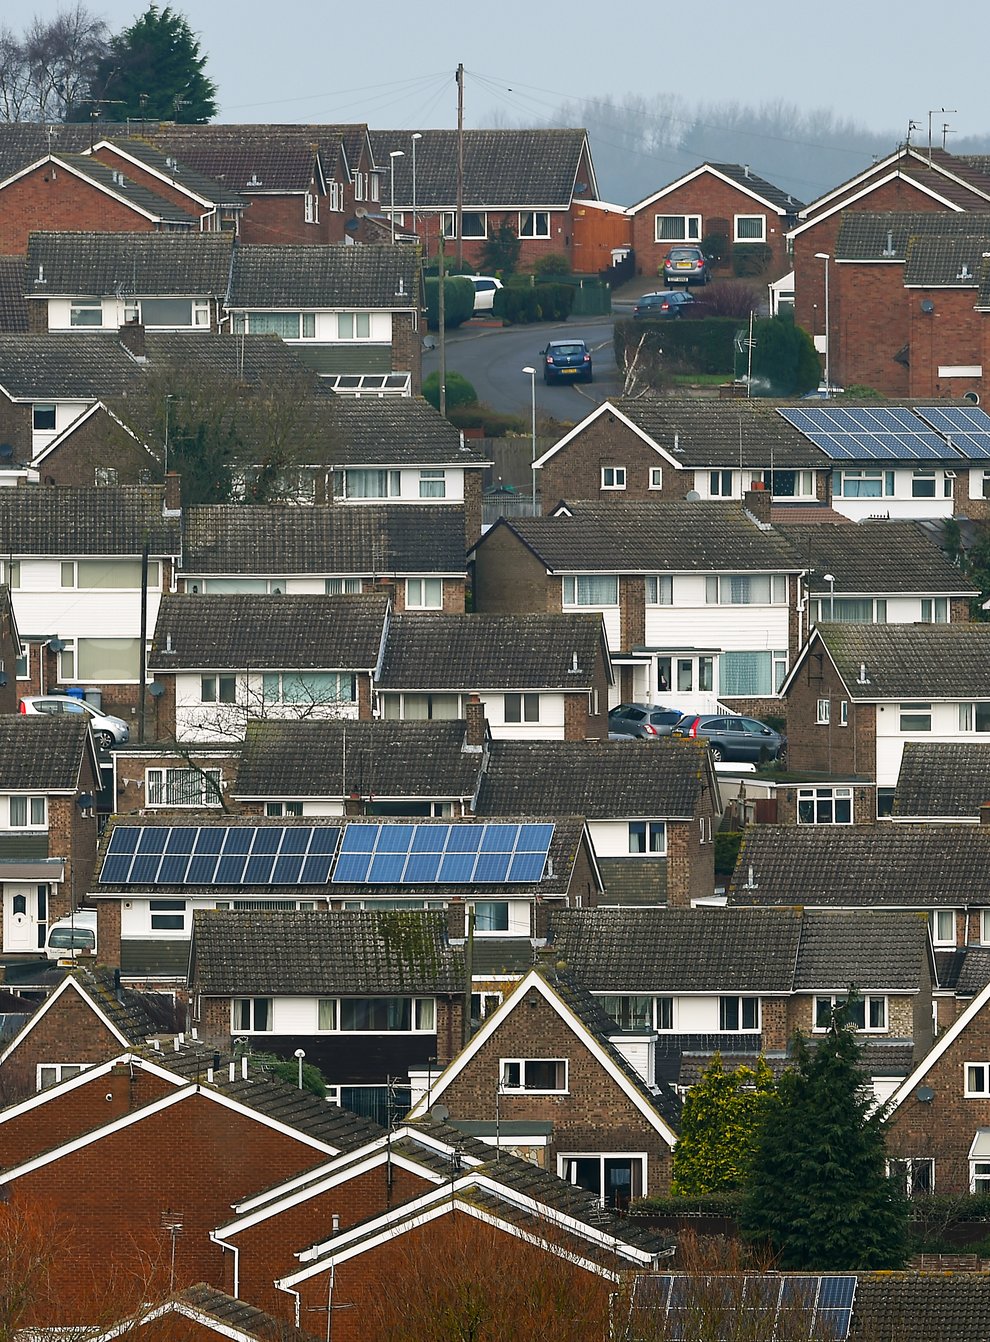 The heat and buildings strategy aims to cut emissions from homes (Joe Giddens/PA)